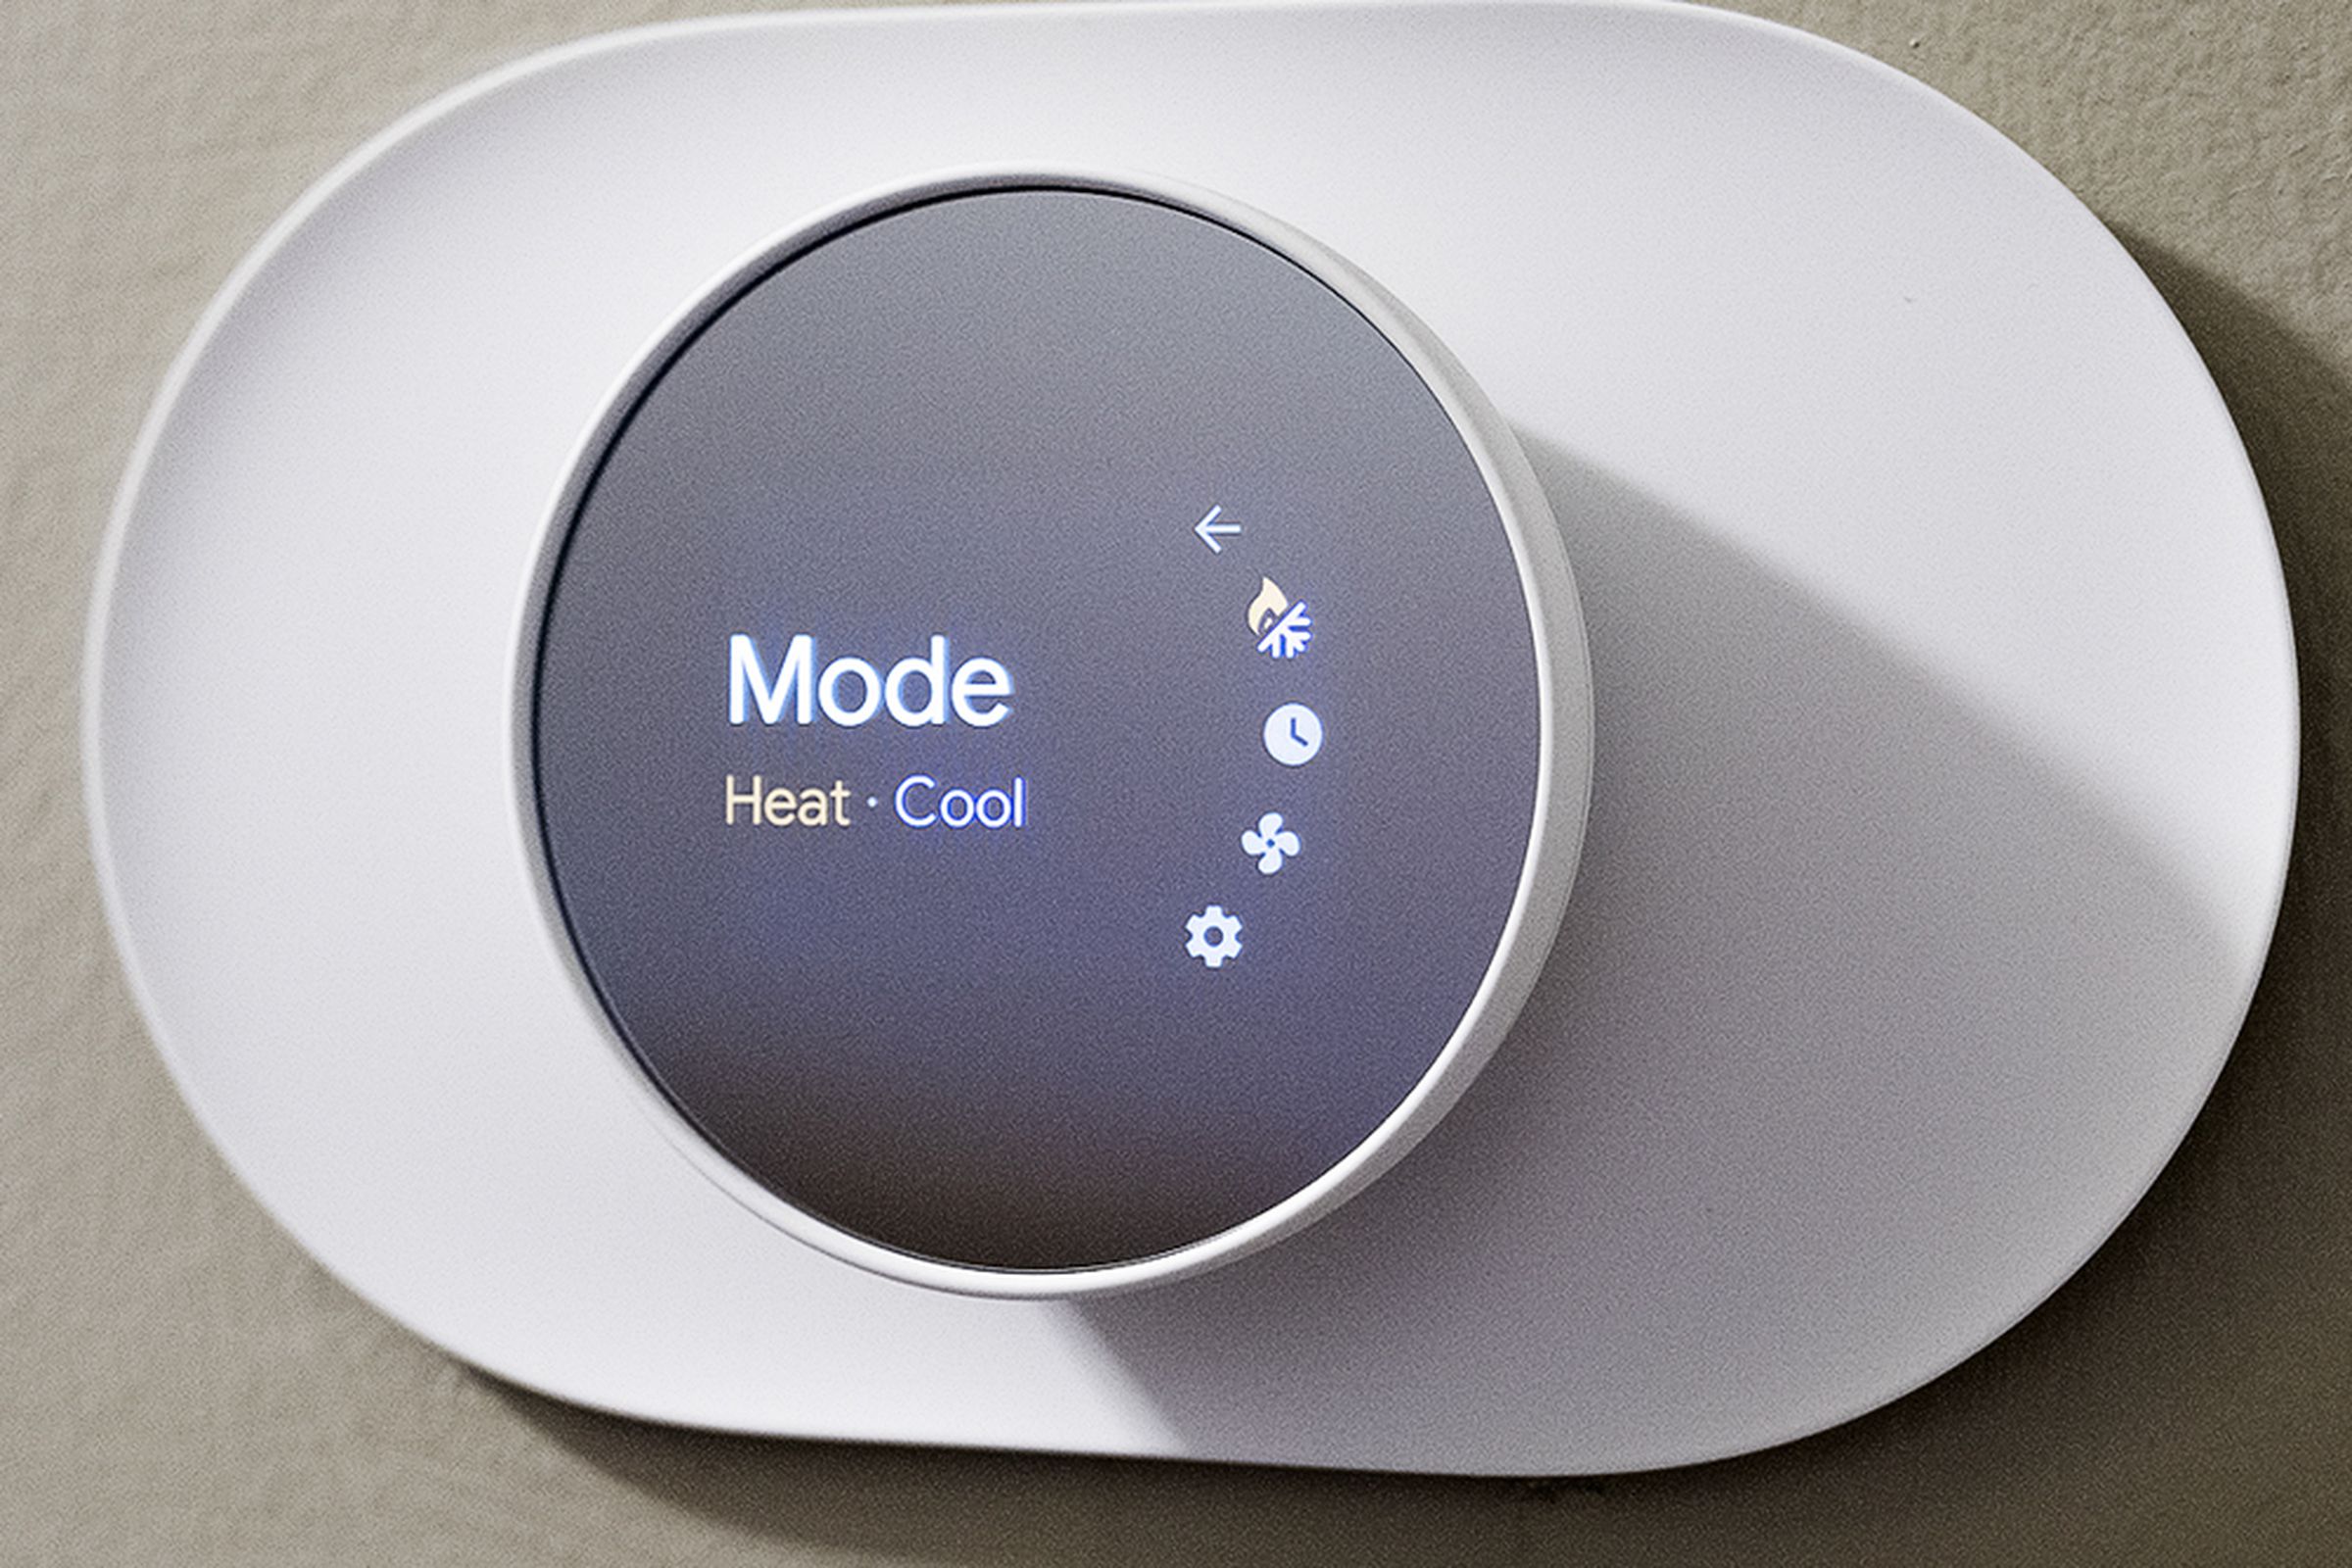 The 2020 Nest Thermostat will get Matter support starting this week.